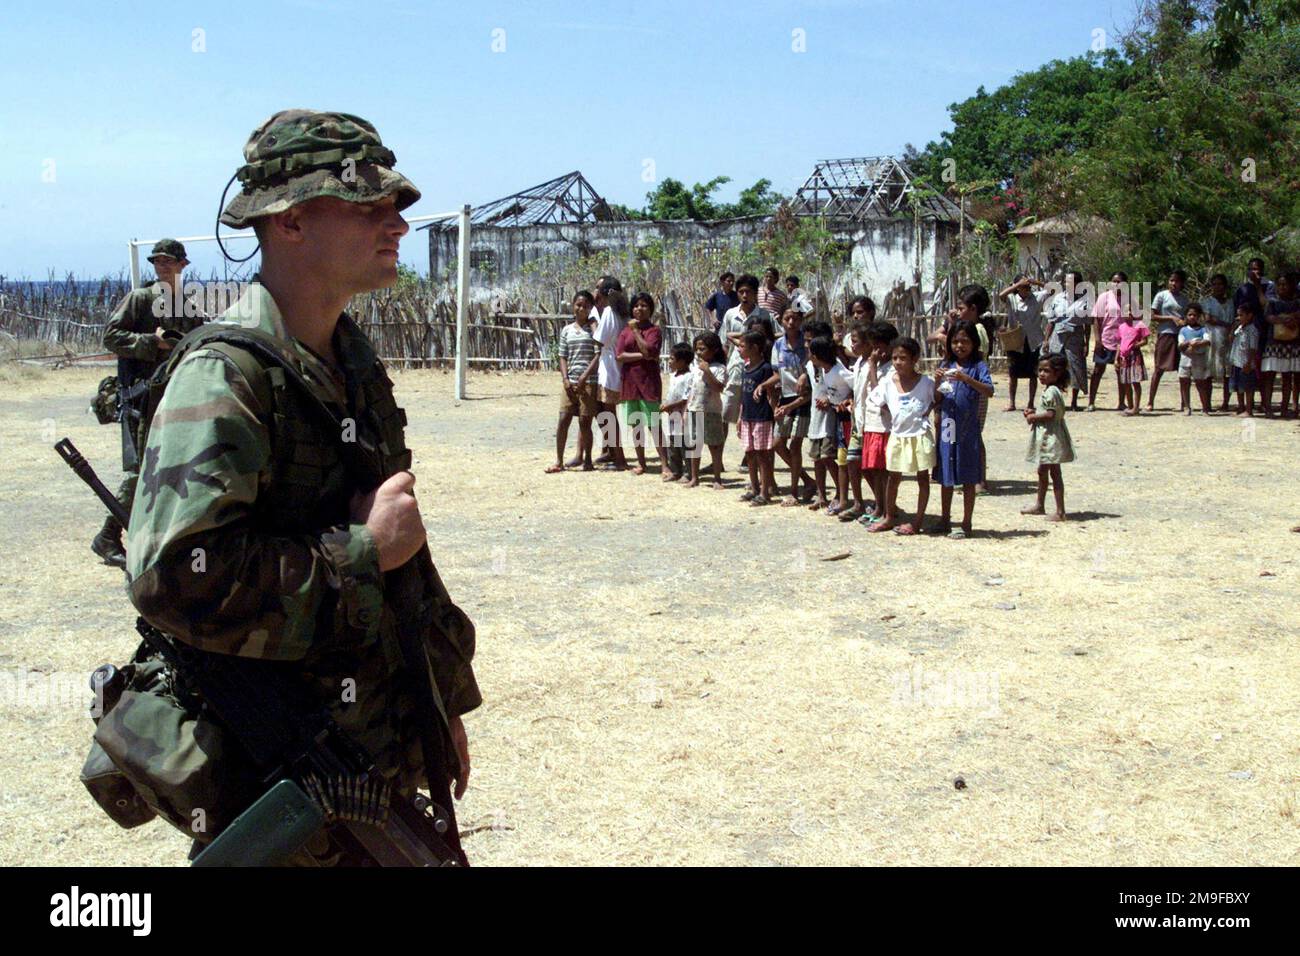 US Marine Lance Corporal Gregory Hughes, a SAW (Squad Automatic Weapon) GUNNER with Third Platoon, India Company, Battalion Landing Team 3/1, 13TH Marine Expeditionary Unit (Special Operations Capable), holds security at the Beach Landing Zone on Arturo Island during a Humanitarian Assistance Operation, East Timor, September 2000. US Marines and Sailors from Tarawa Amphibious Ready Group spent three days in East Timor providing Medical and Community Relations Services to help rebuild the war torn nation. Subject Operation/Series: HUMANITARIAN ASSISTANCE OPERATION, EAST TIMOR Base: Arturo Islan Stock Photo